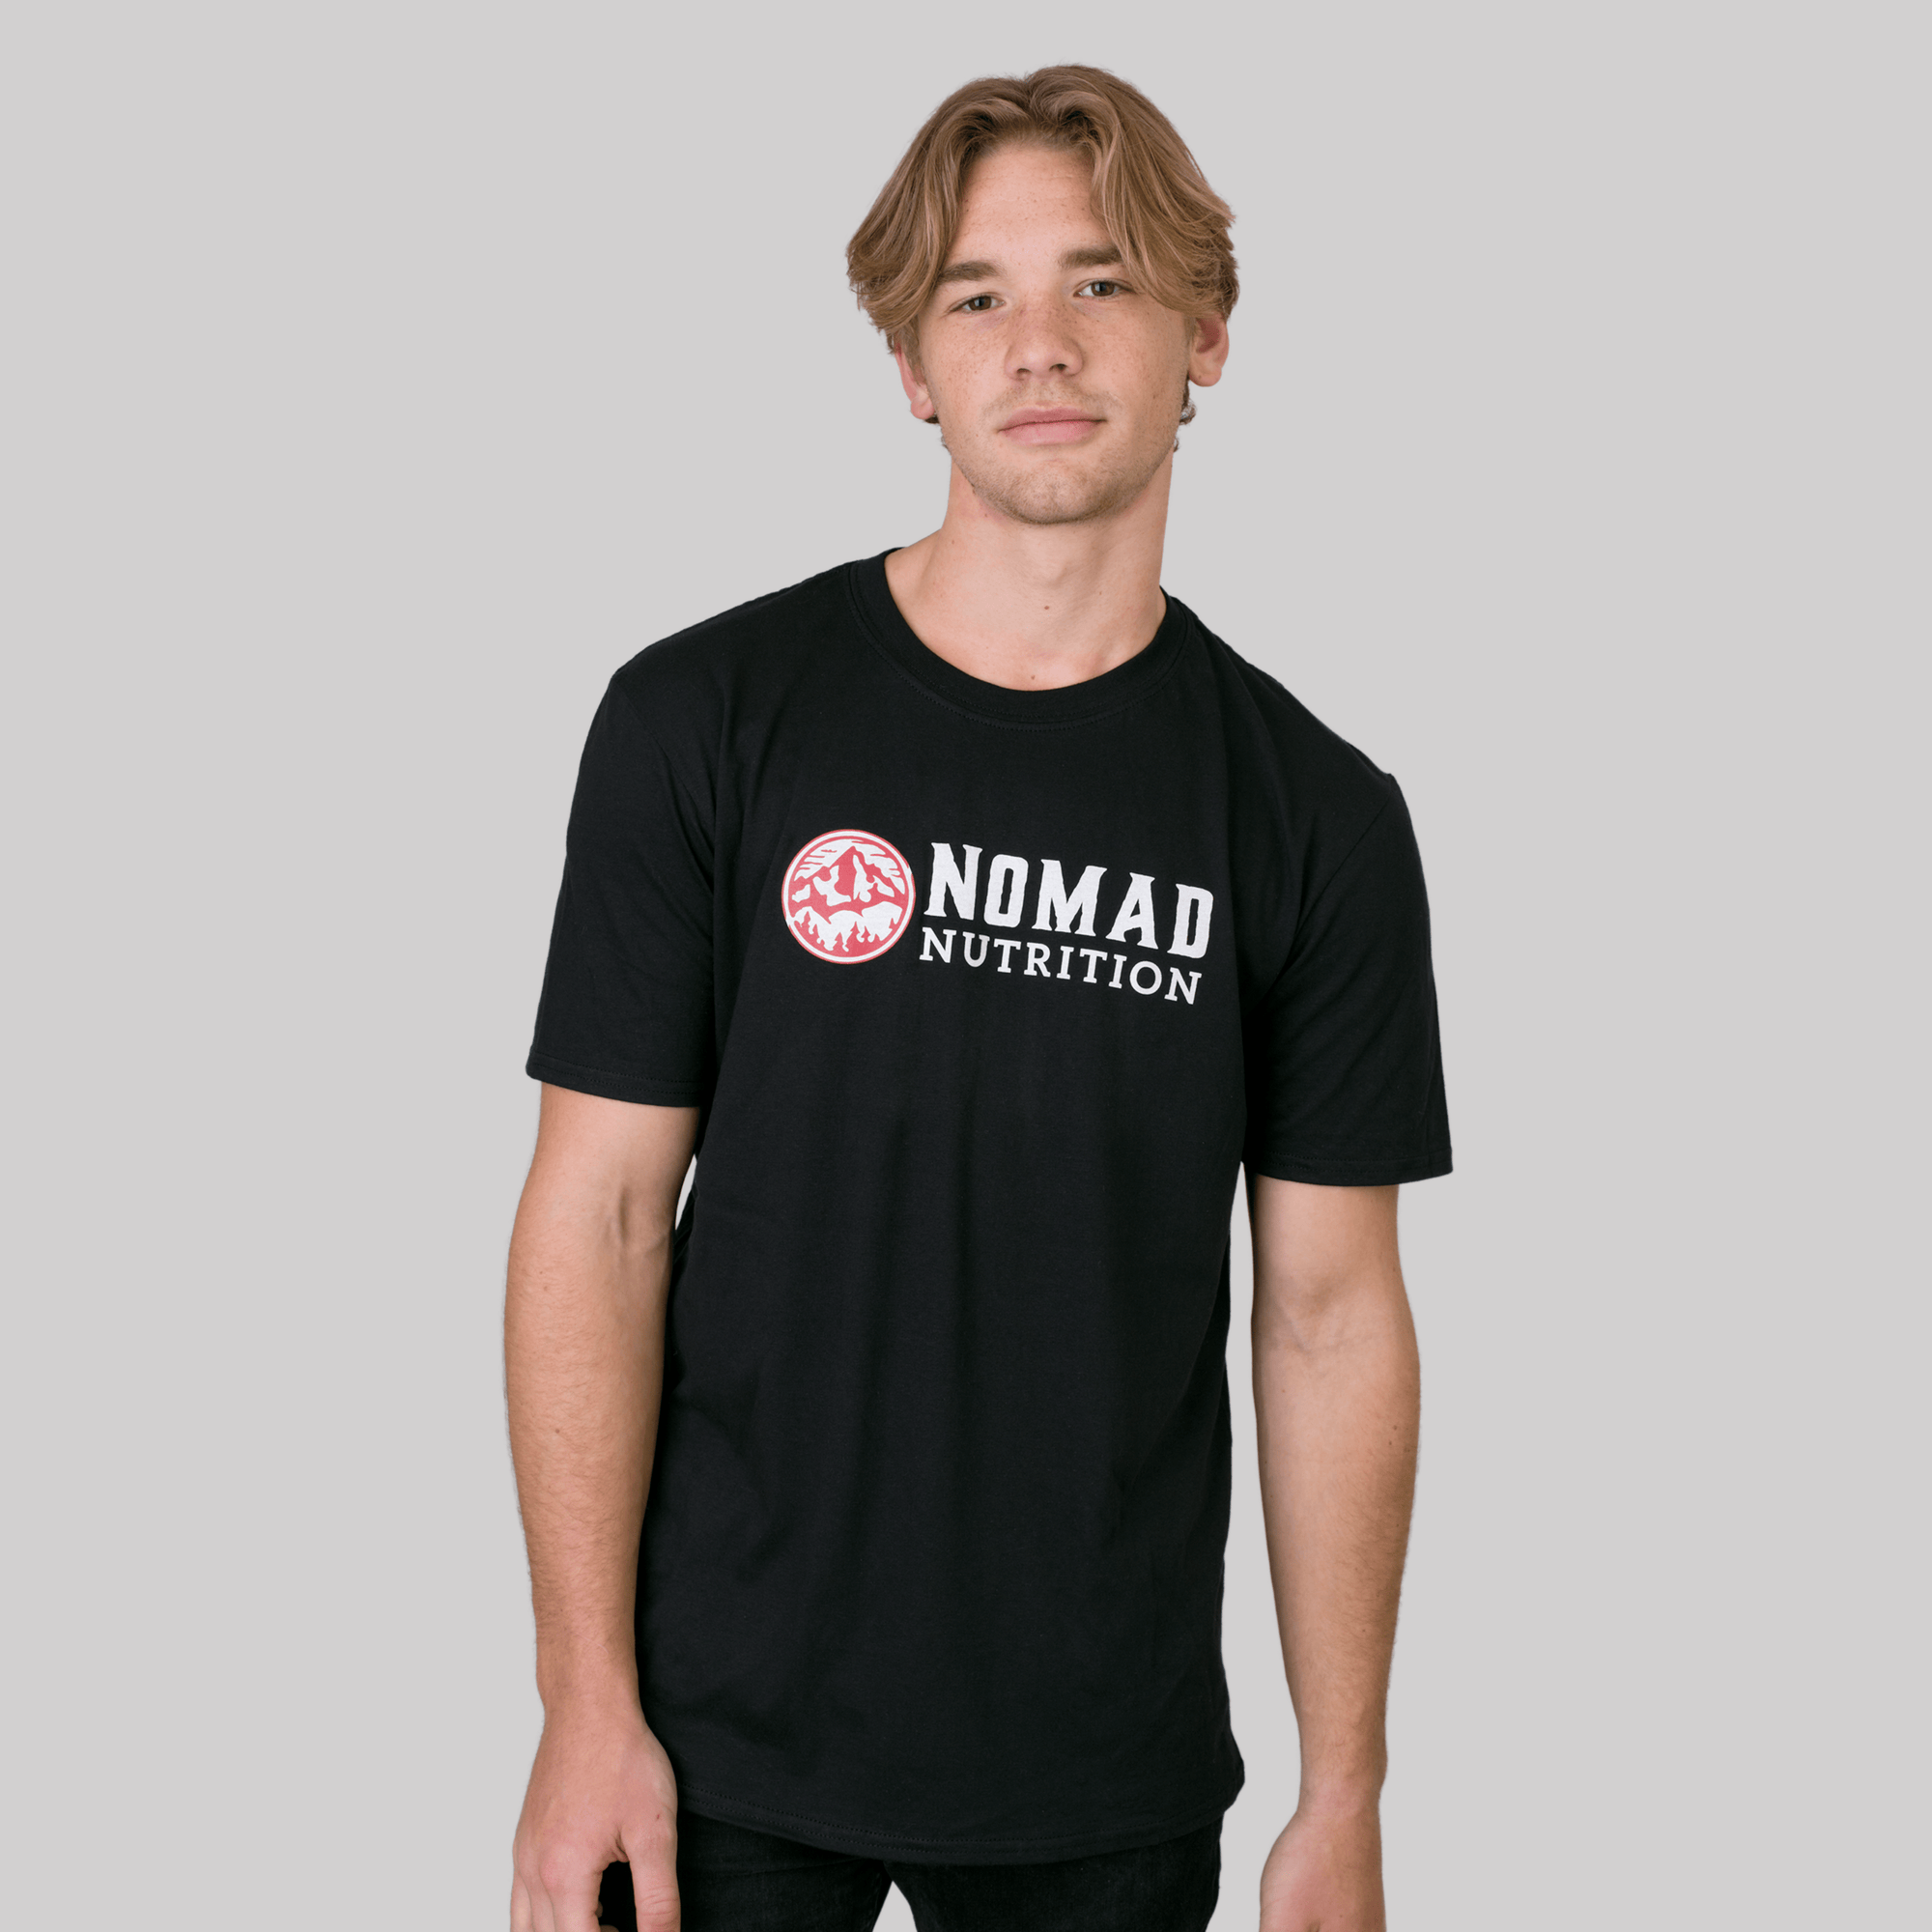 Nomad Nutrition Shadow T-shirt male model wearing large